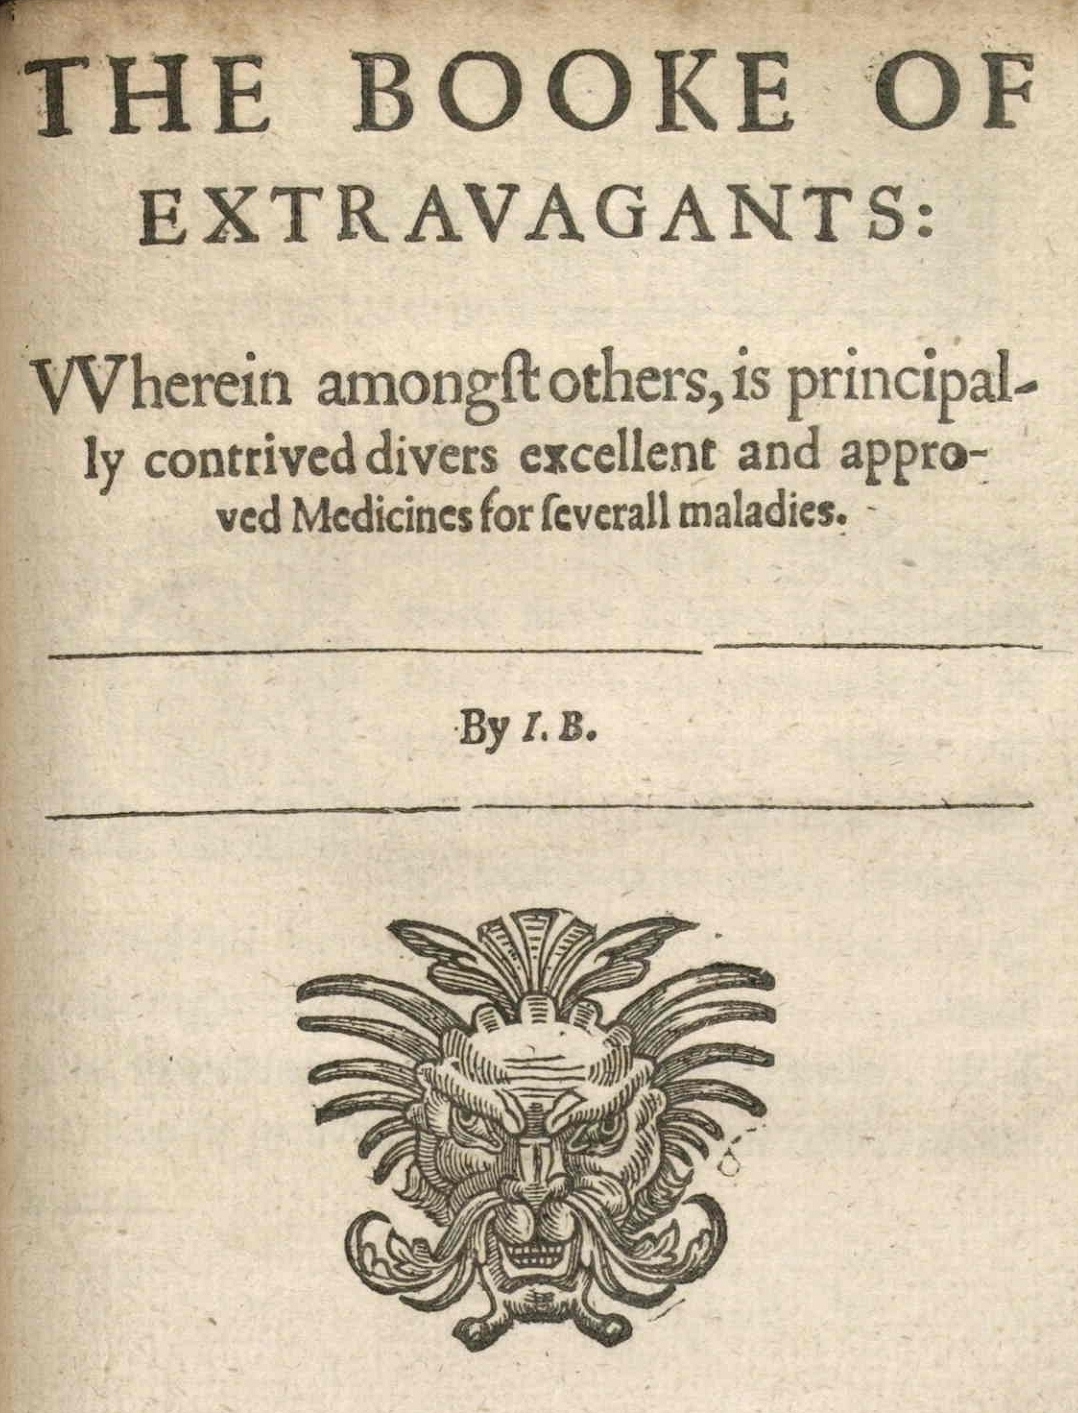 chapter titlepage: Extravagants, John Bate 'Mysteryes of Nature and Art'